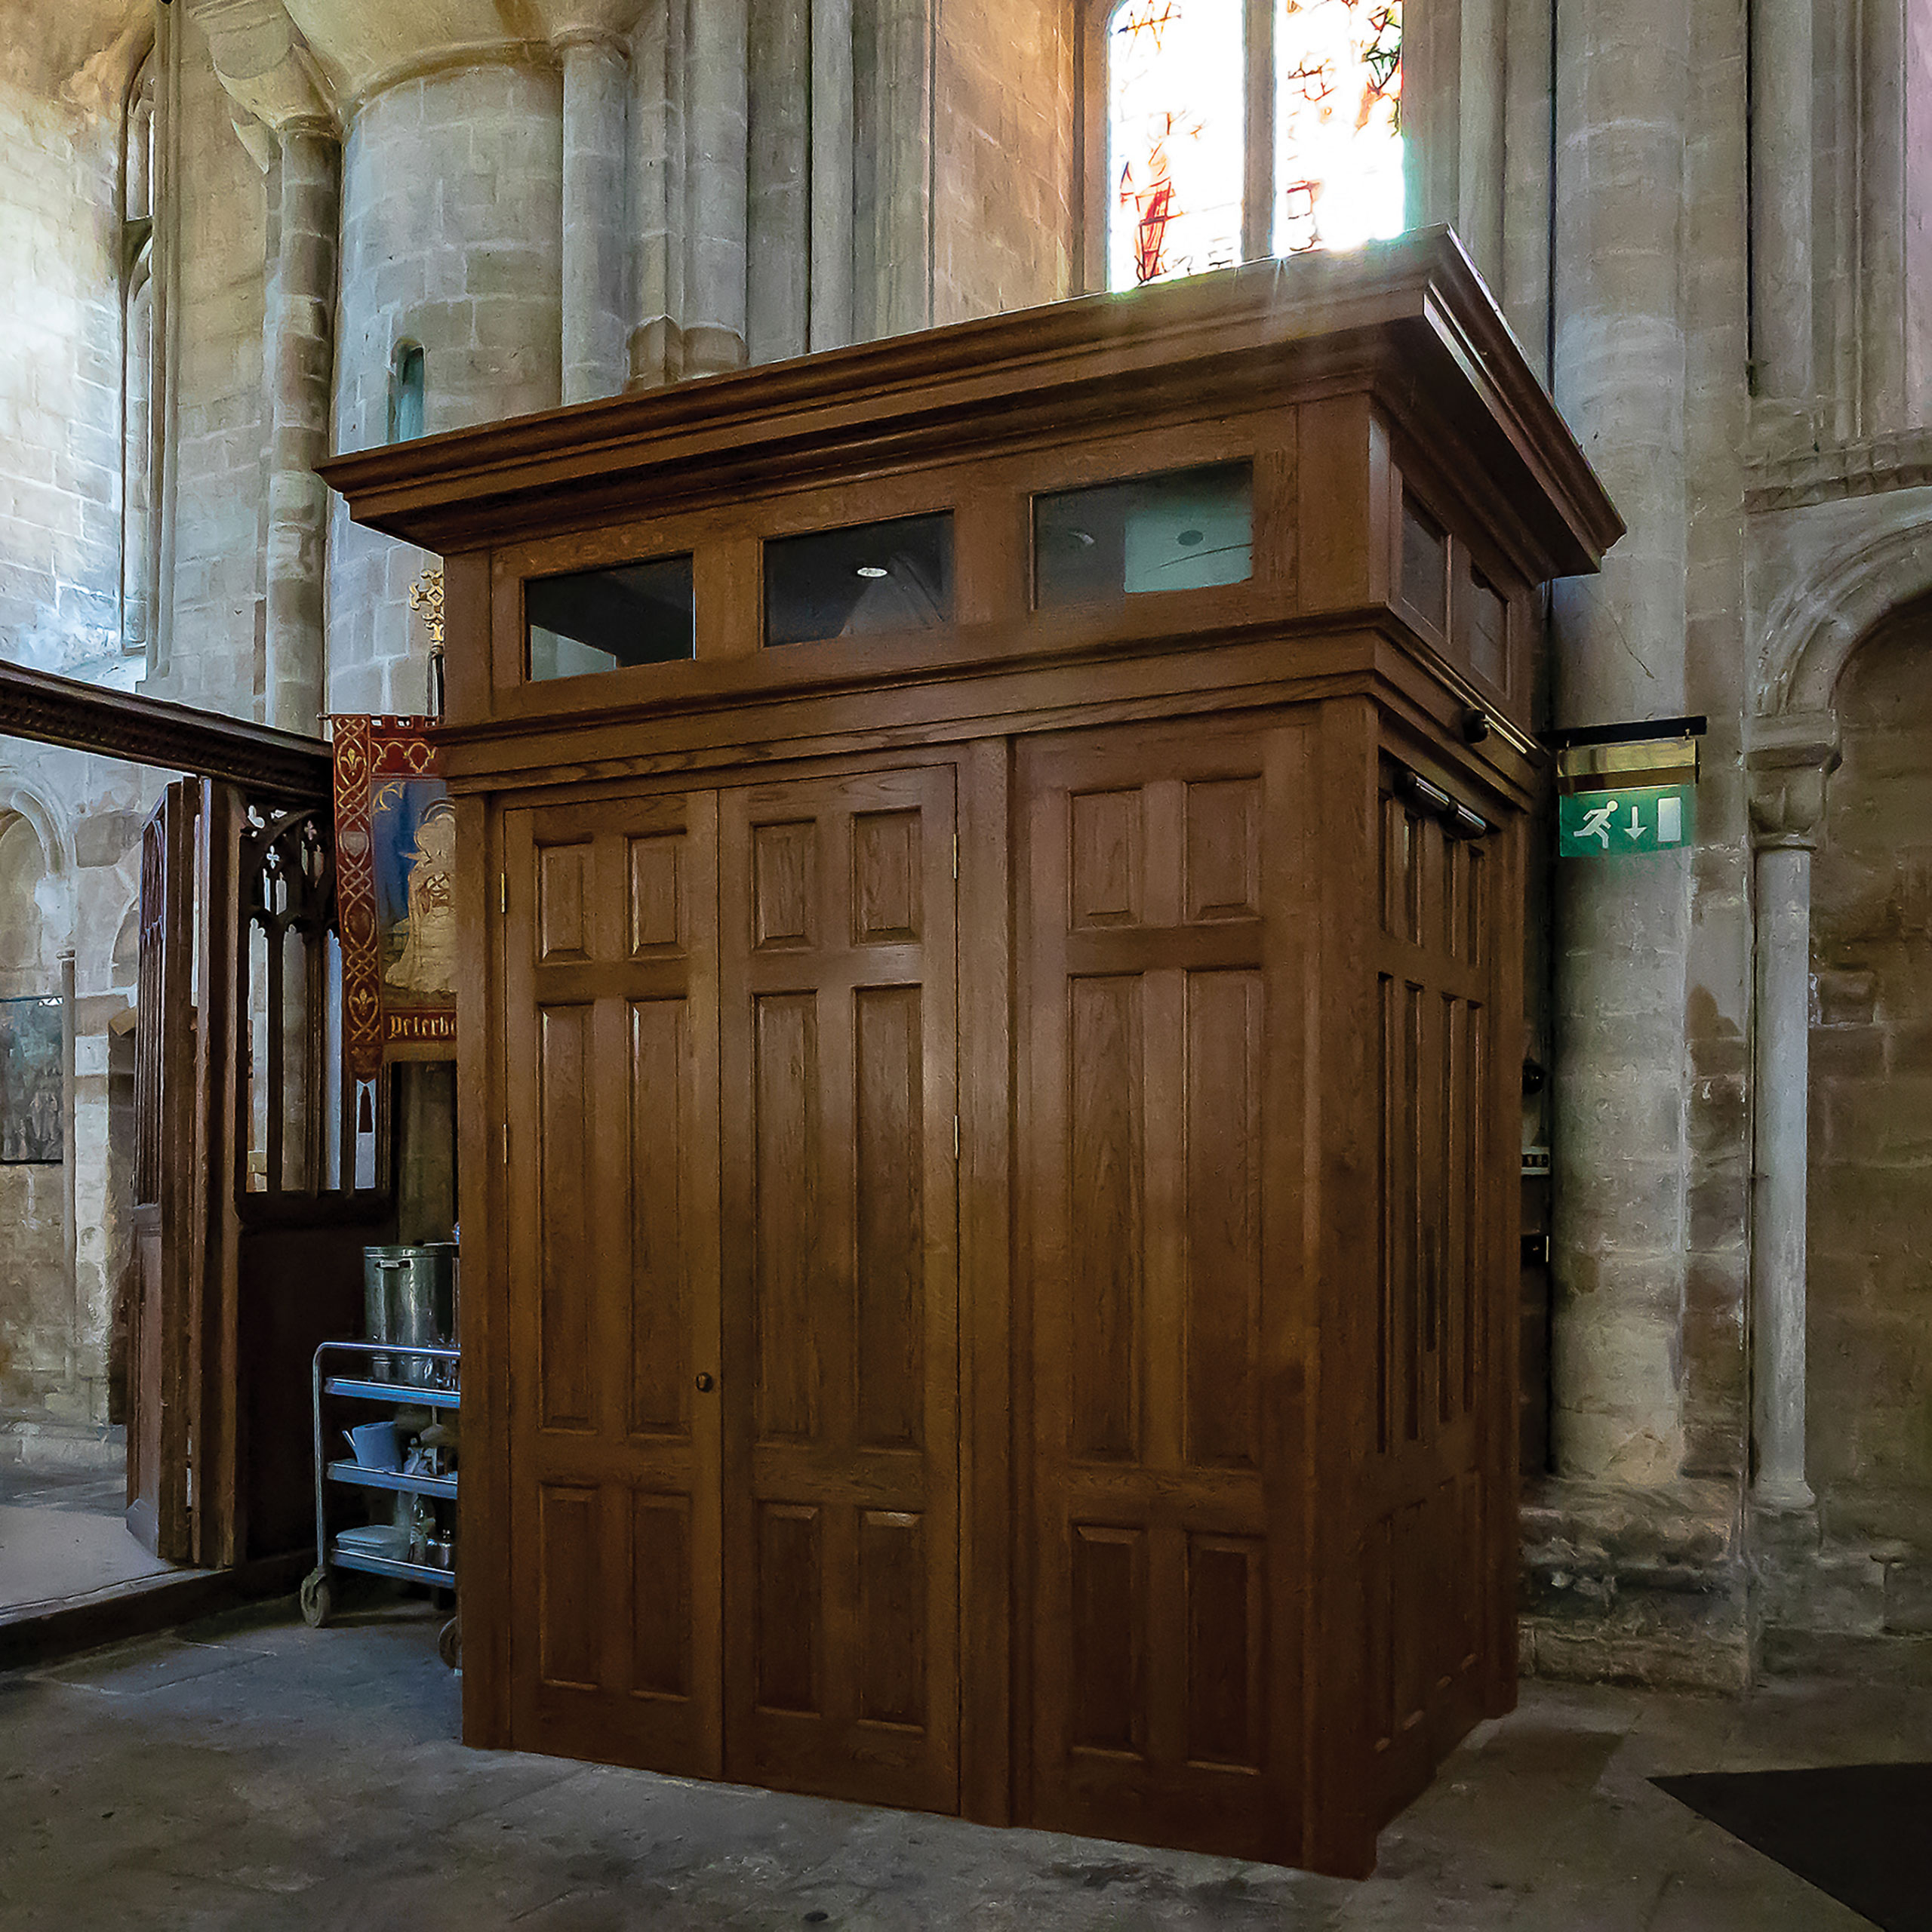 One-off ecclestiastical joinery